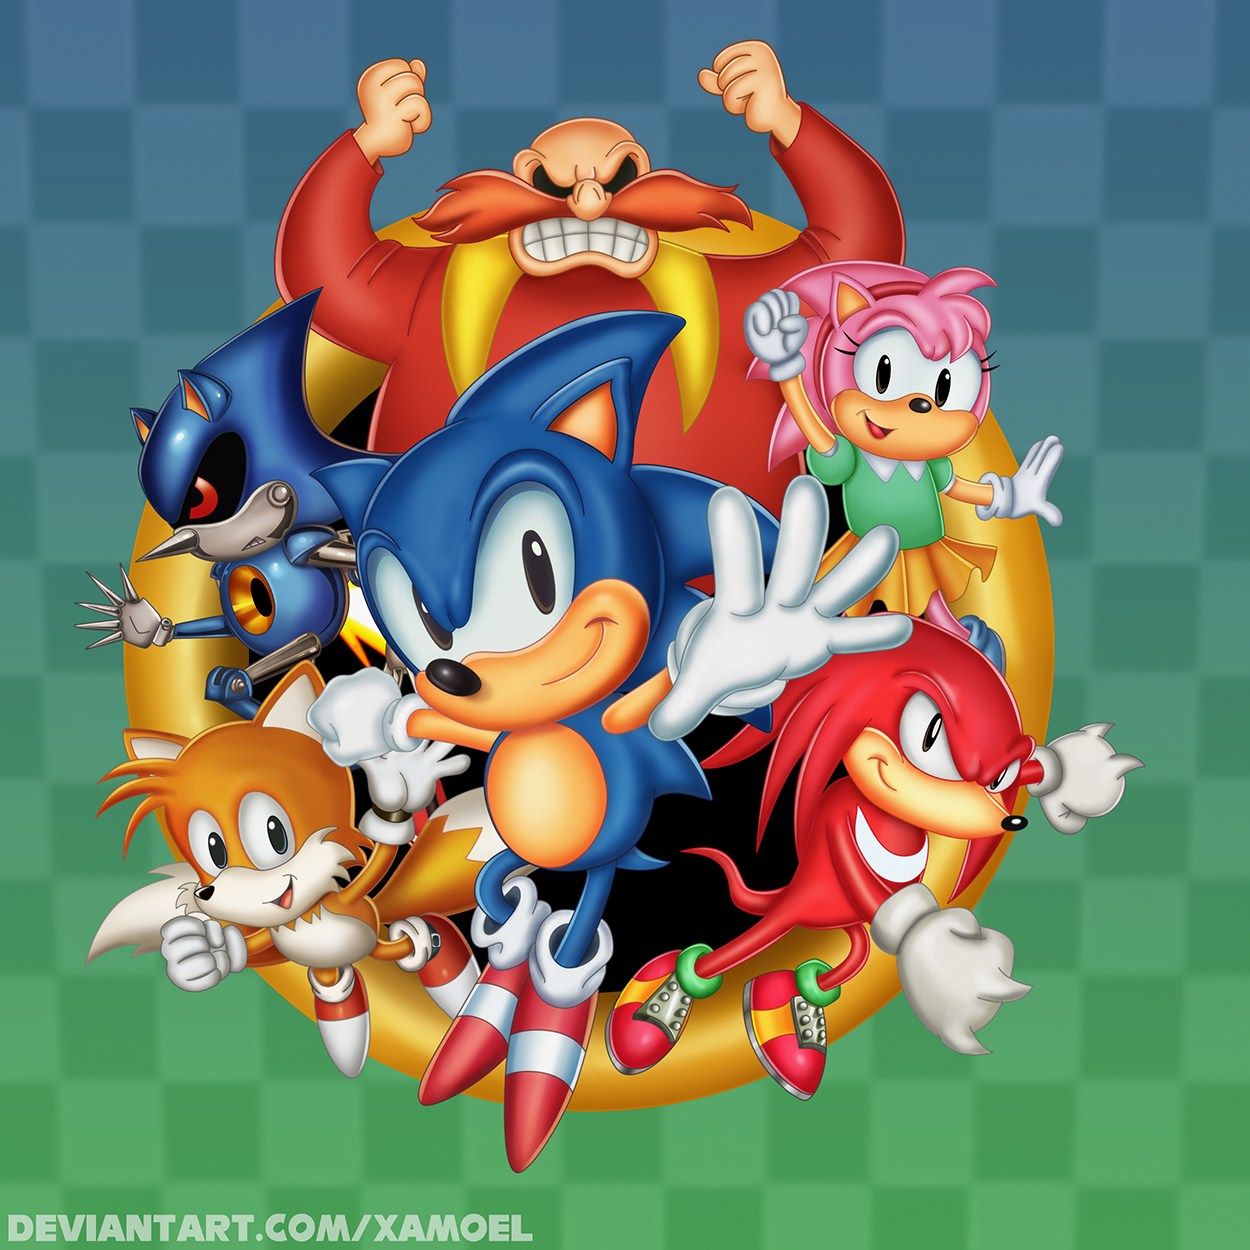 robot robot robot robot sonic tails knuckles amy